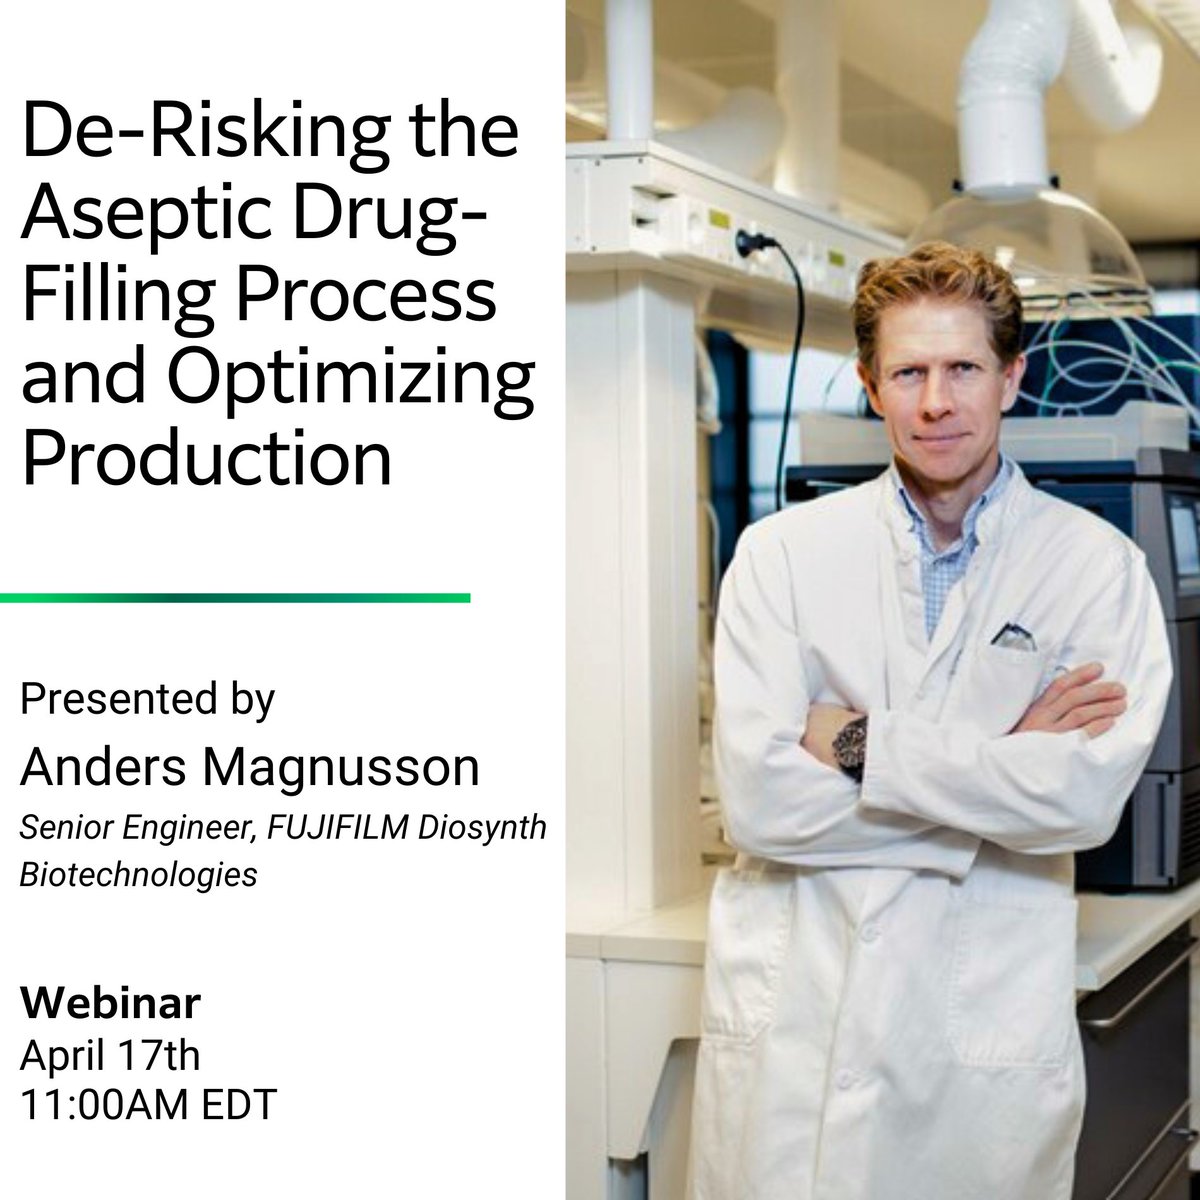 Join us on April 17th, at 11:00AM EDT for a webinar on “De-Risking the Aseptic Drug-Filling Process and Optimizing Production.” Led by our very own, Anders Magnusson, Senior Engineer, at FUJIFILM Diosynth Biotechnologies. Don’t miss out, Register now: event.on24.com/wcc/r/4519233/…